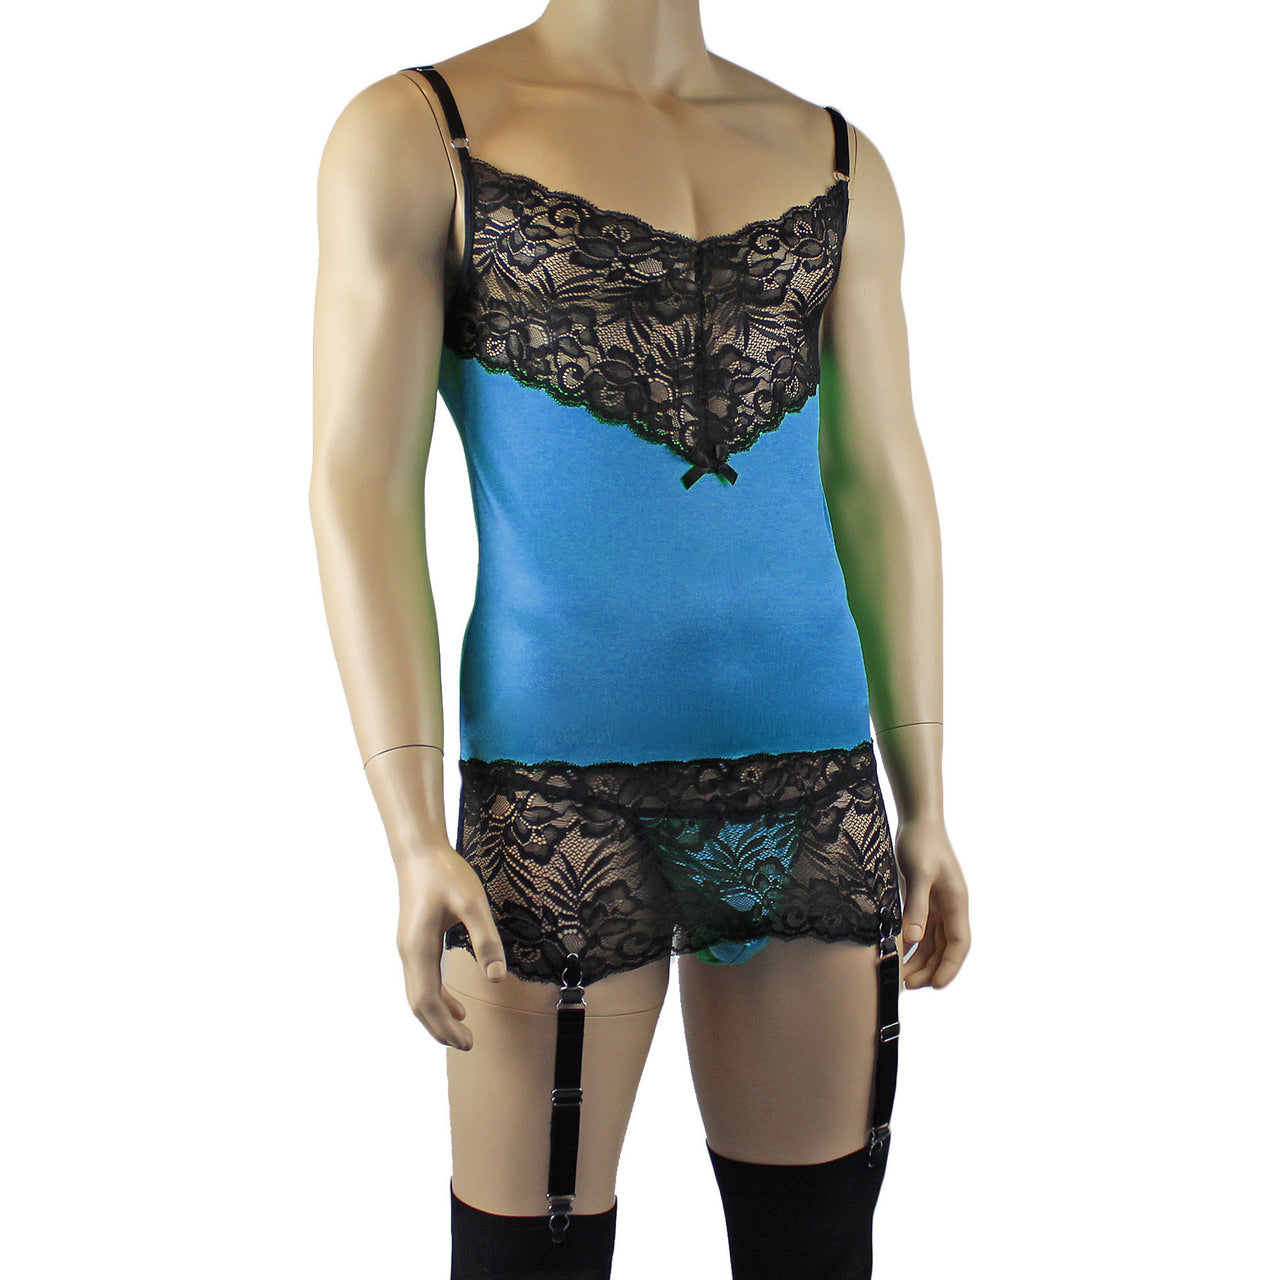 Mens Risque Camisole Mini Dress Chemise, G string & Stockings Teal and Black Lace